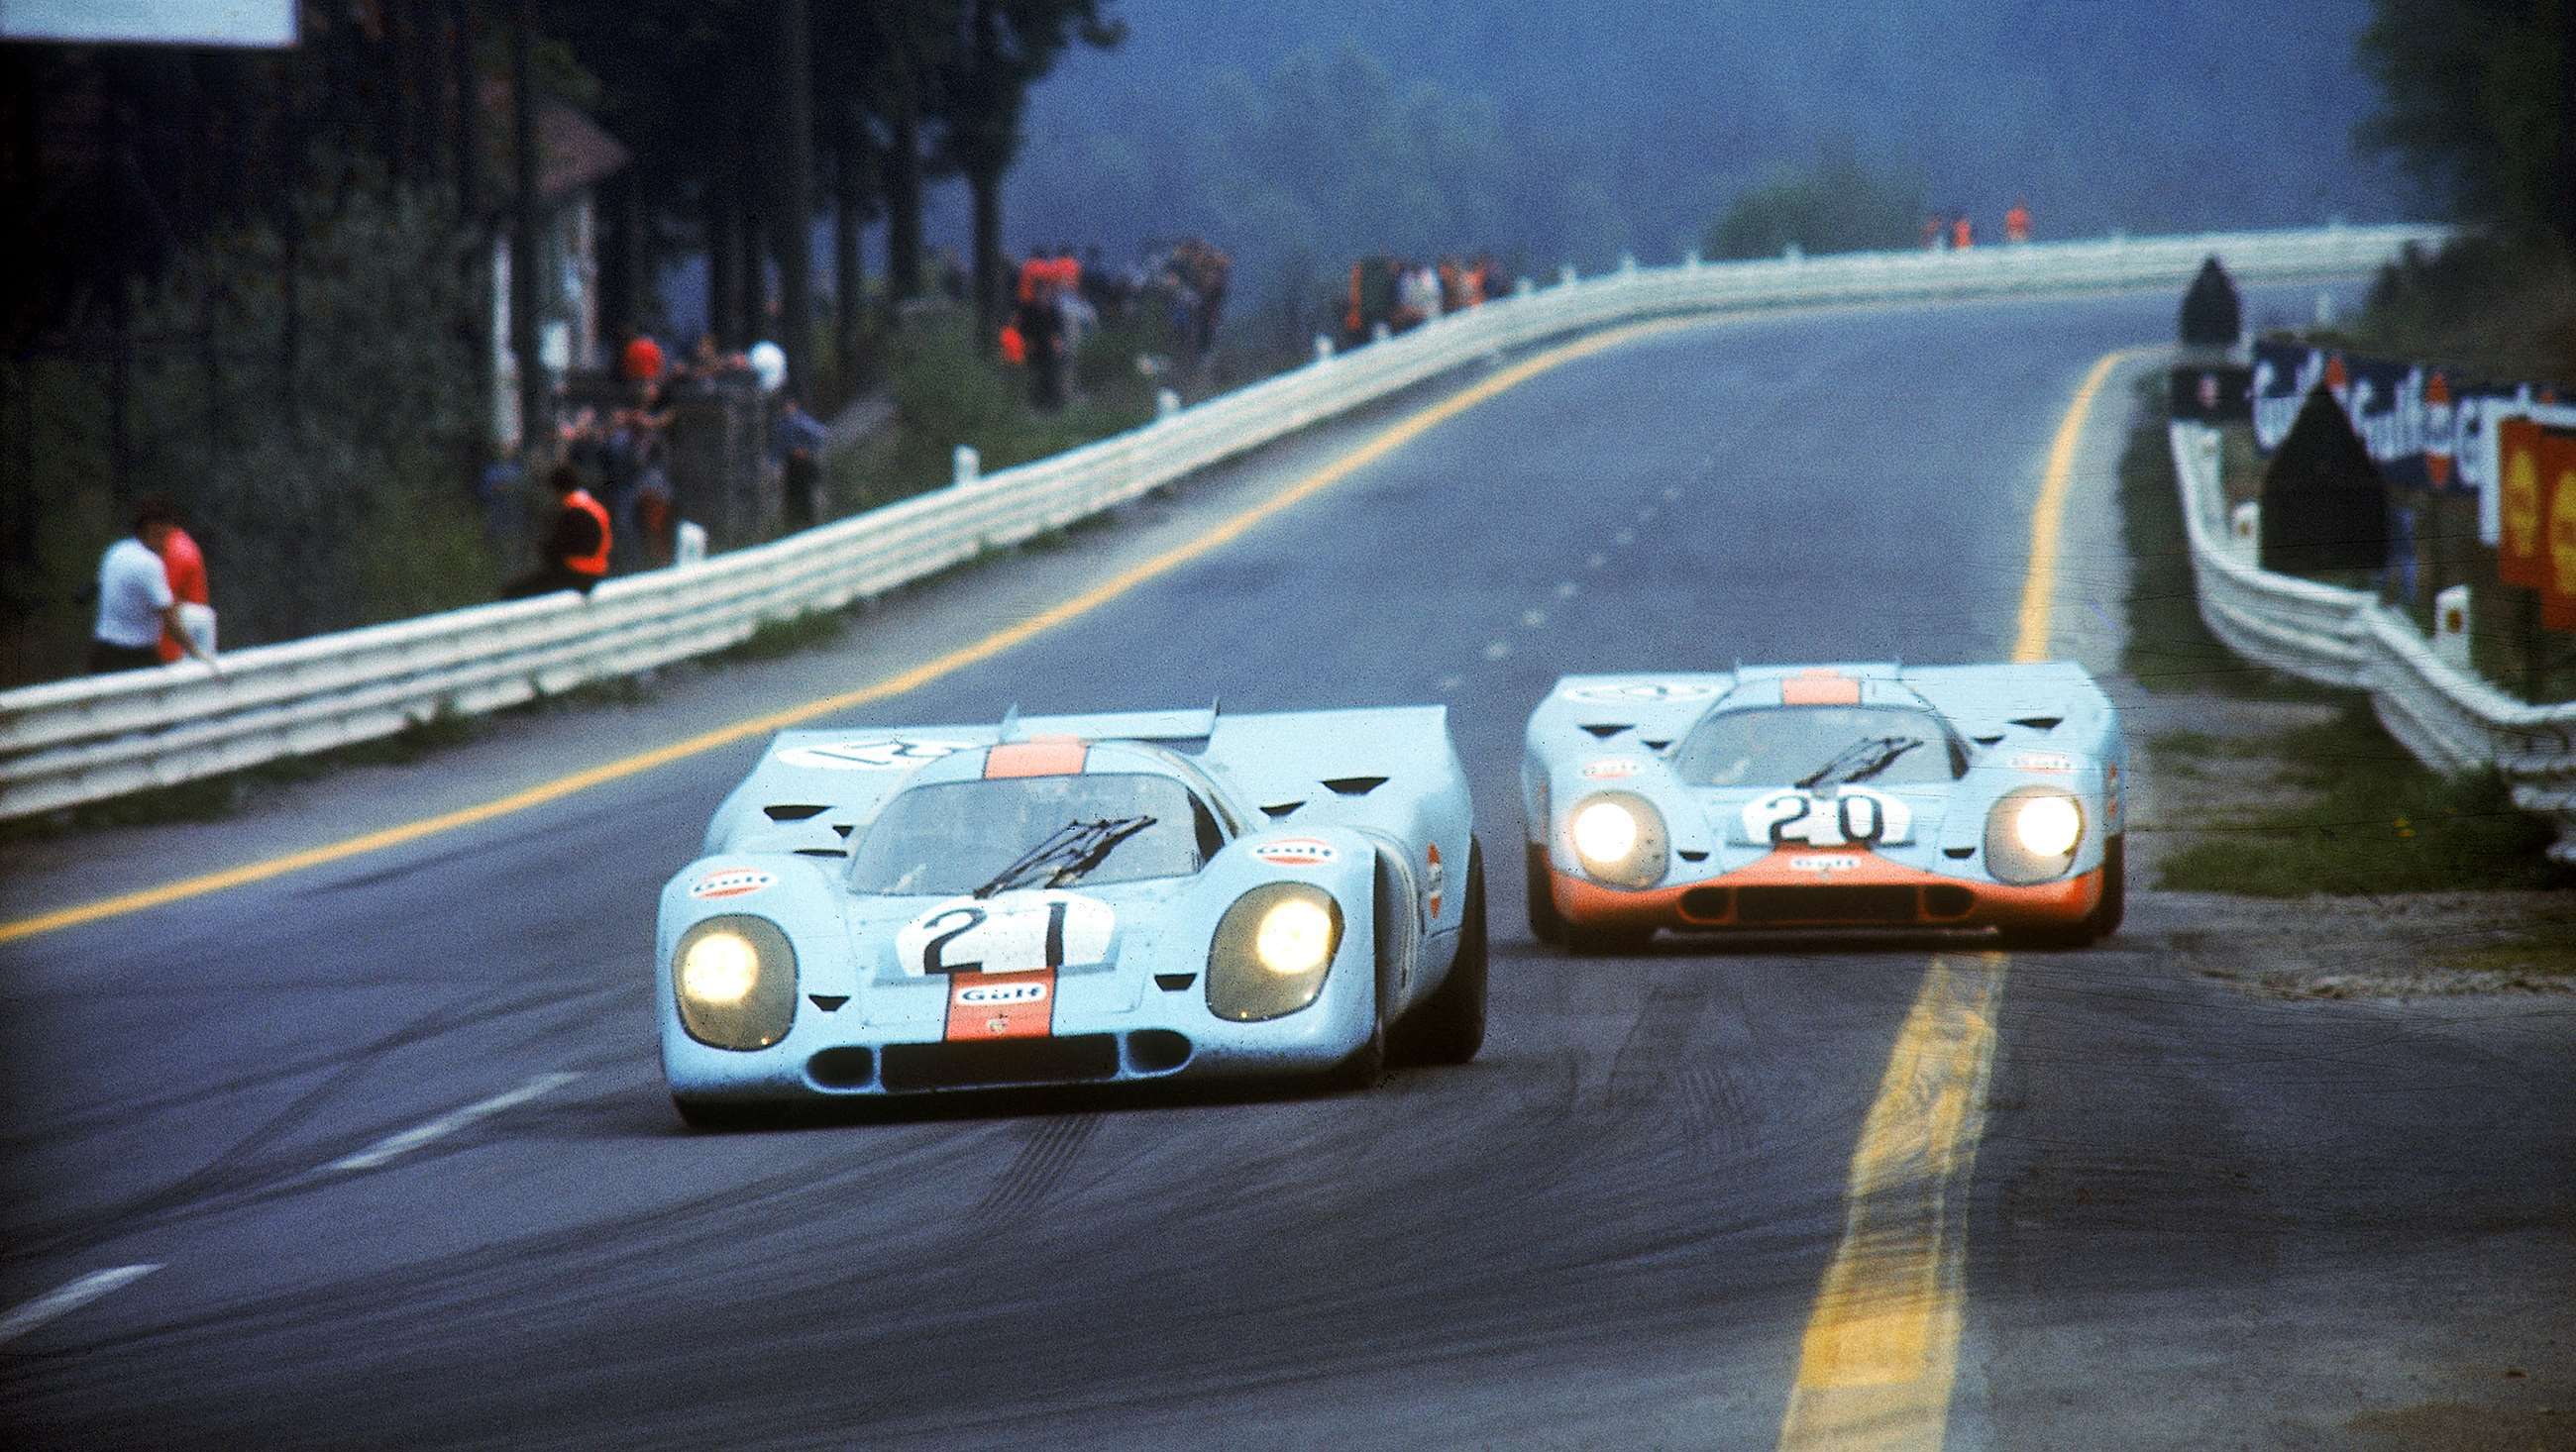 10-best-porsches-of-all-time-porsche-917-kh-coupe-apa-francorchamps-1971-goodwood-27112019.jpg